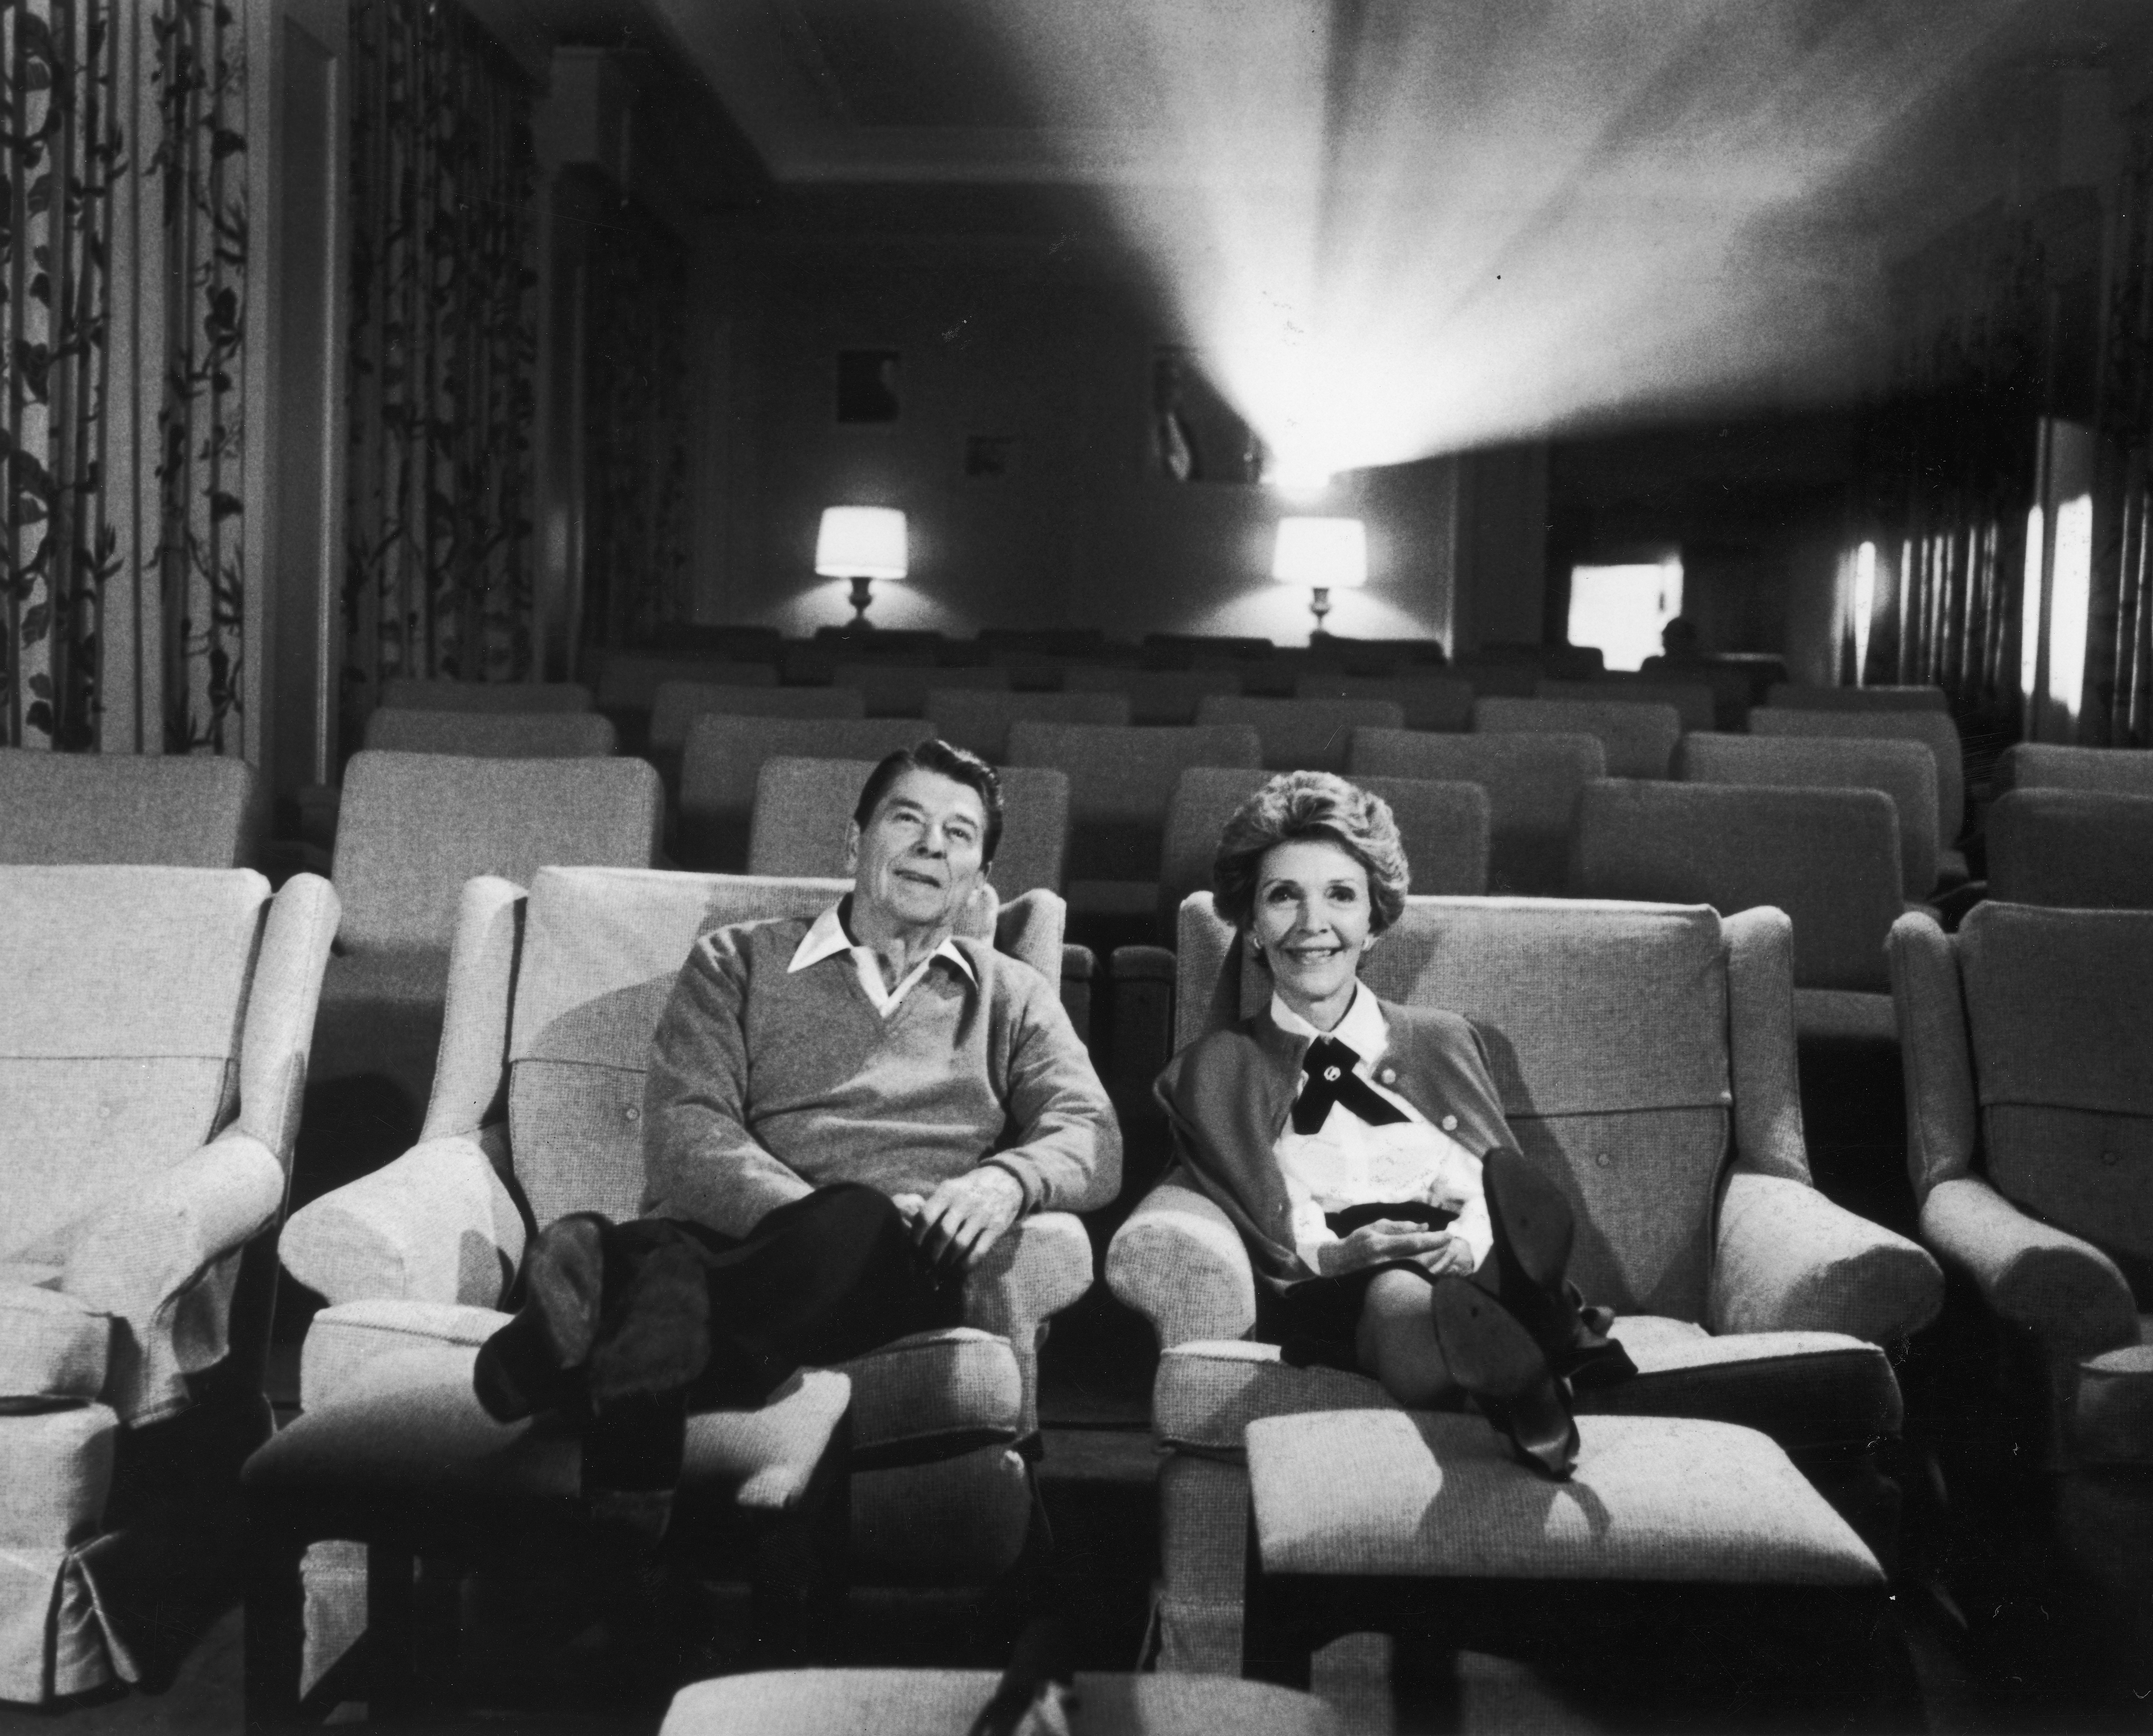 President Ronald Reagan and wife Nancy Reagan sit together in their screening room, circa the 1980s.